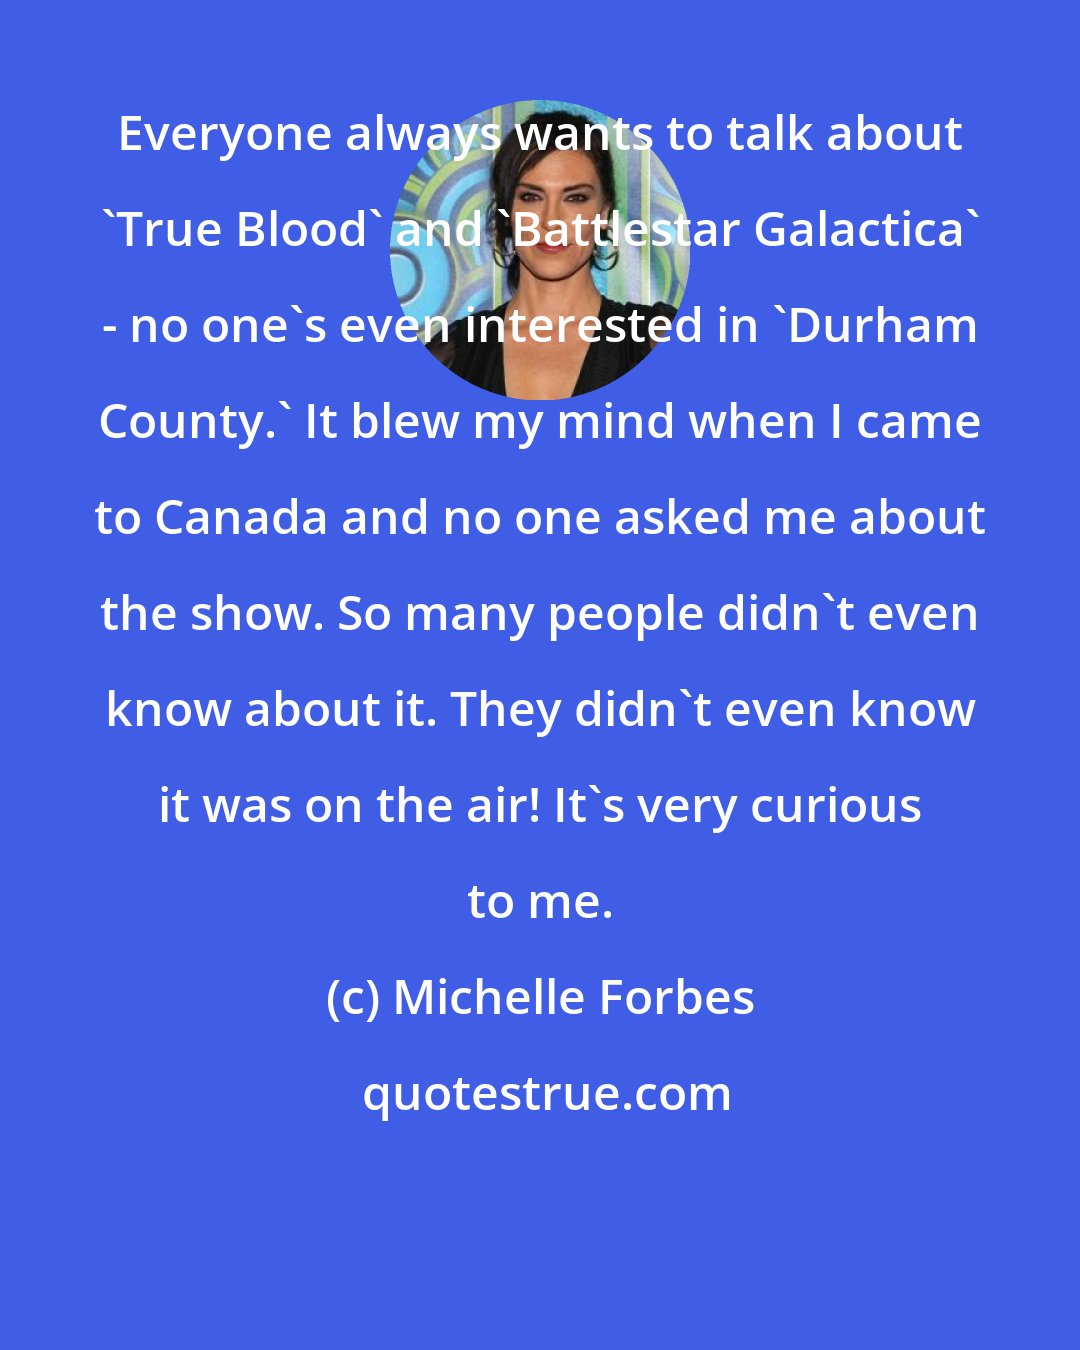 Michelle Forbes: Everyone always wants to talk about 'True Blood' and 'Battlestar Galactica' - no one's even interested in 'Durham County.' It blew my mind when I came to Canada and no one asked me about the show. So many people didn't even know about it. They didn't even know it was on the air! It's very curious to me.